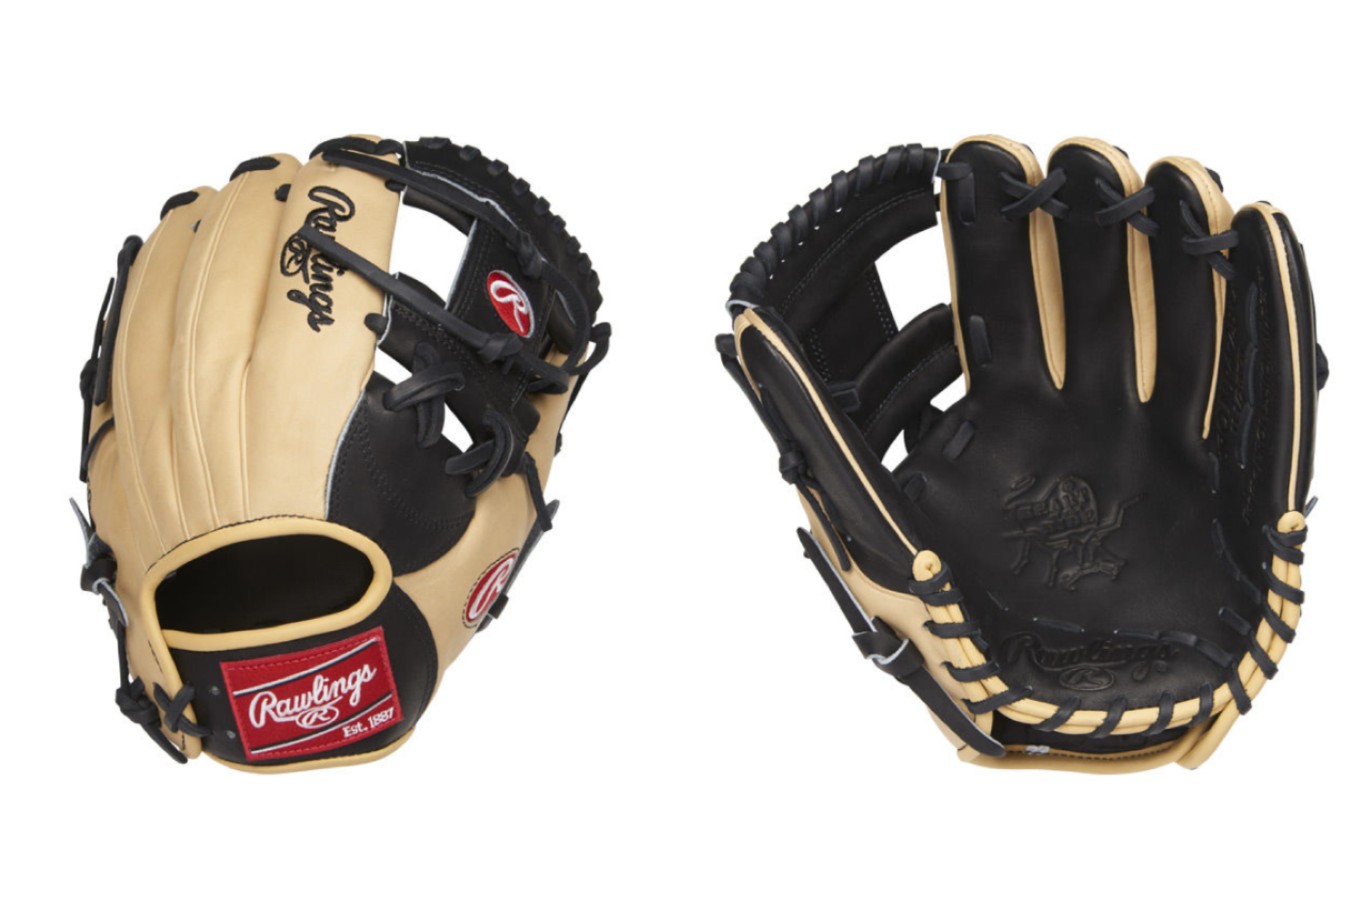 Rawlings Heart of the Hide PRONP4-2BC